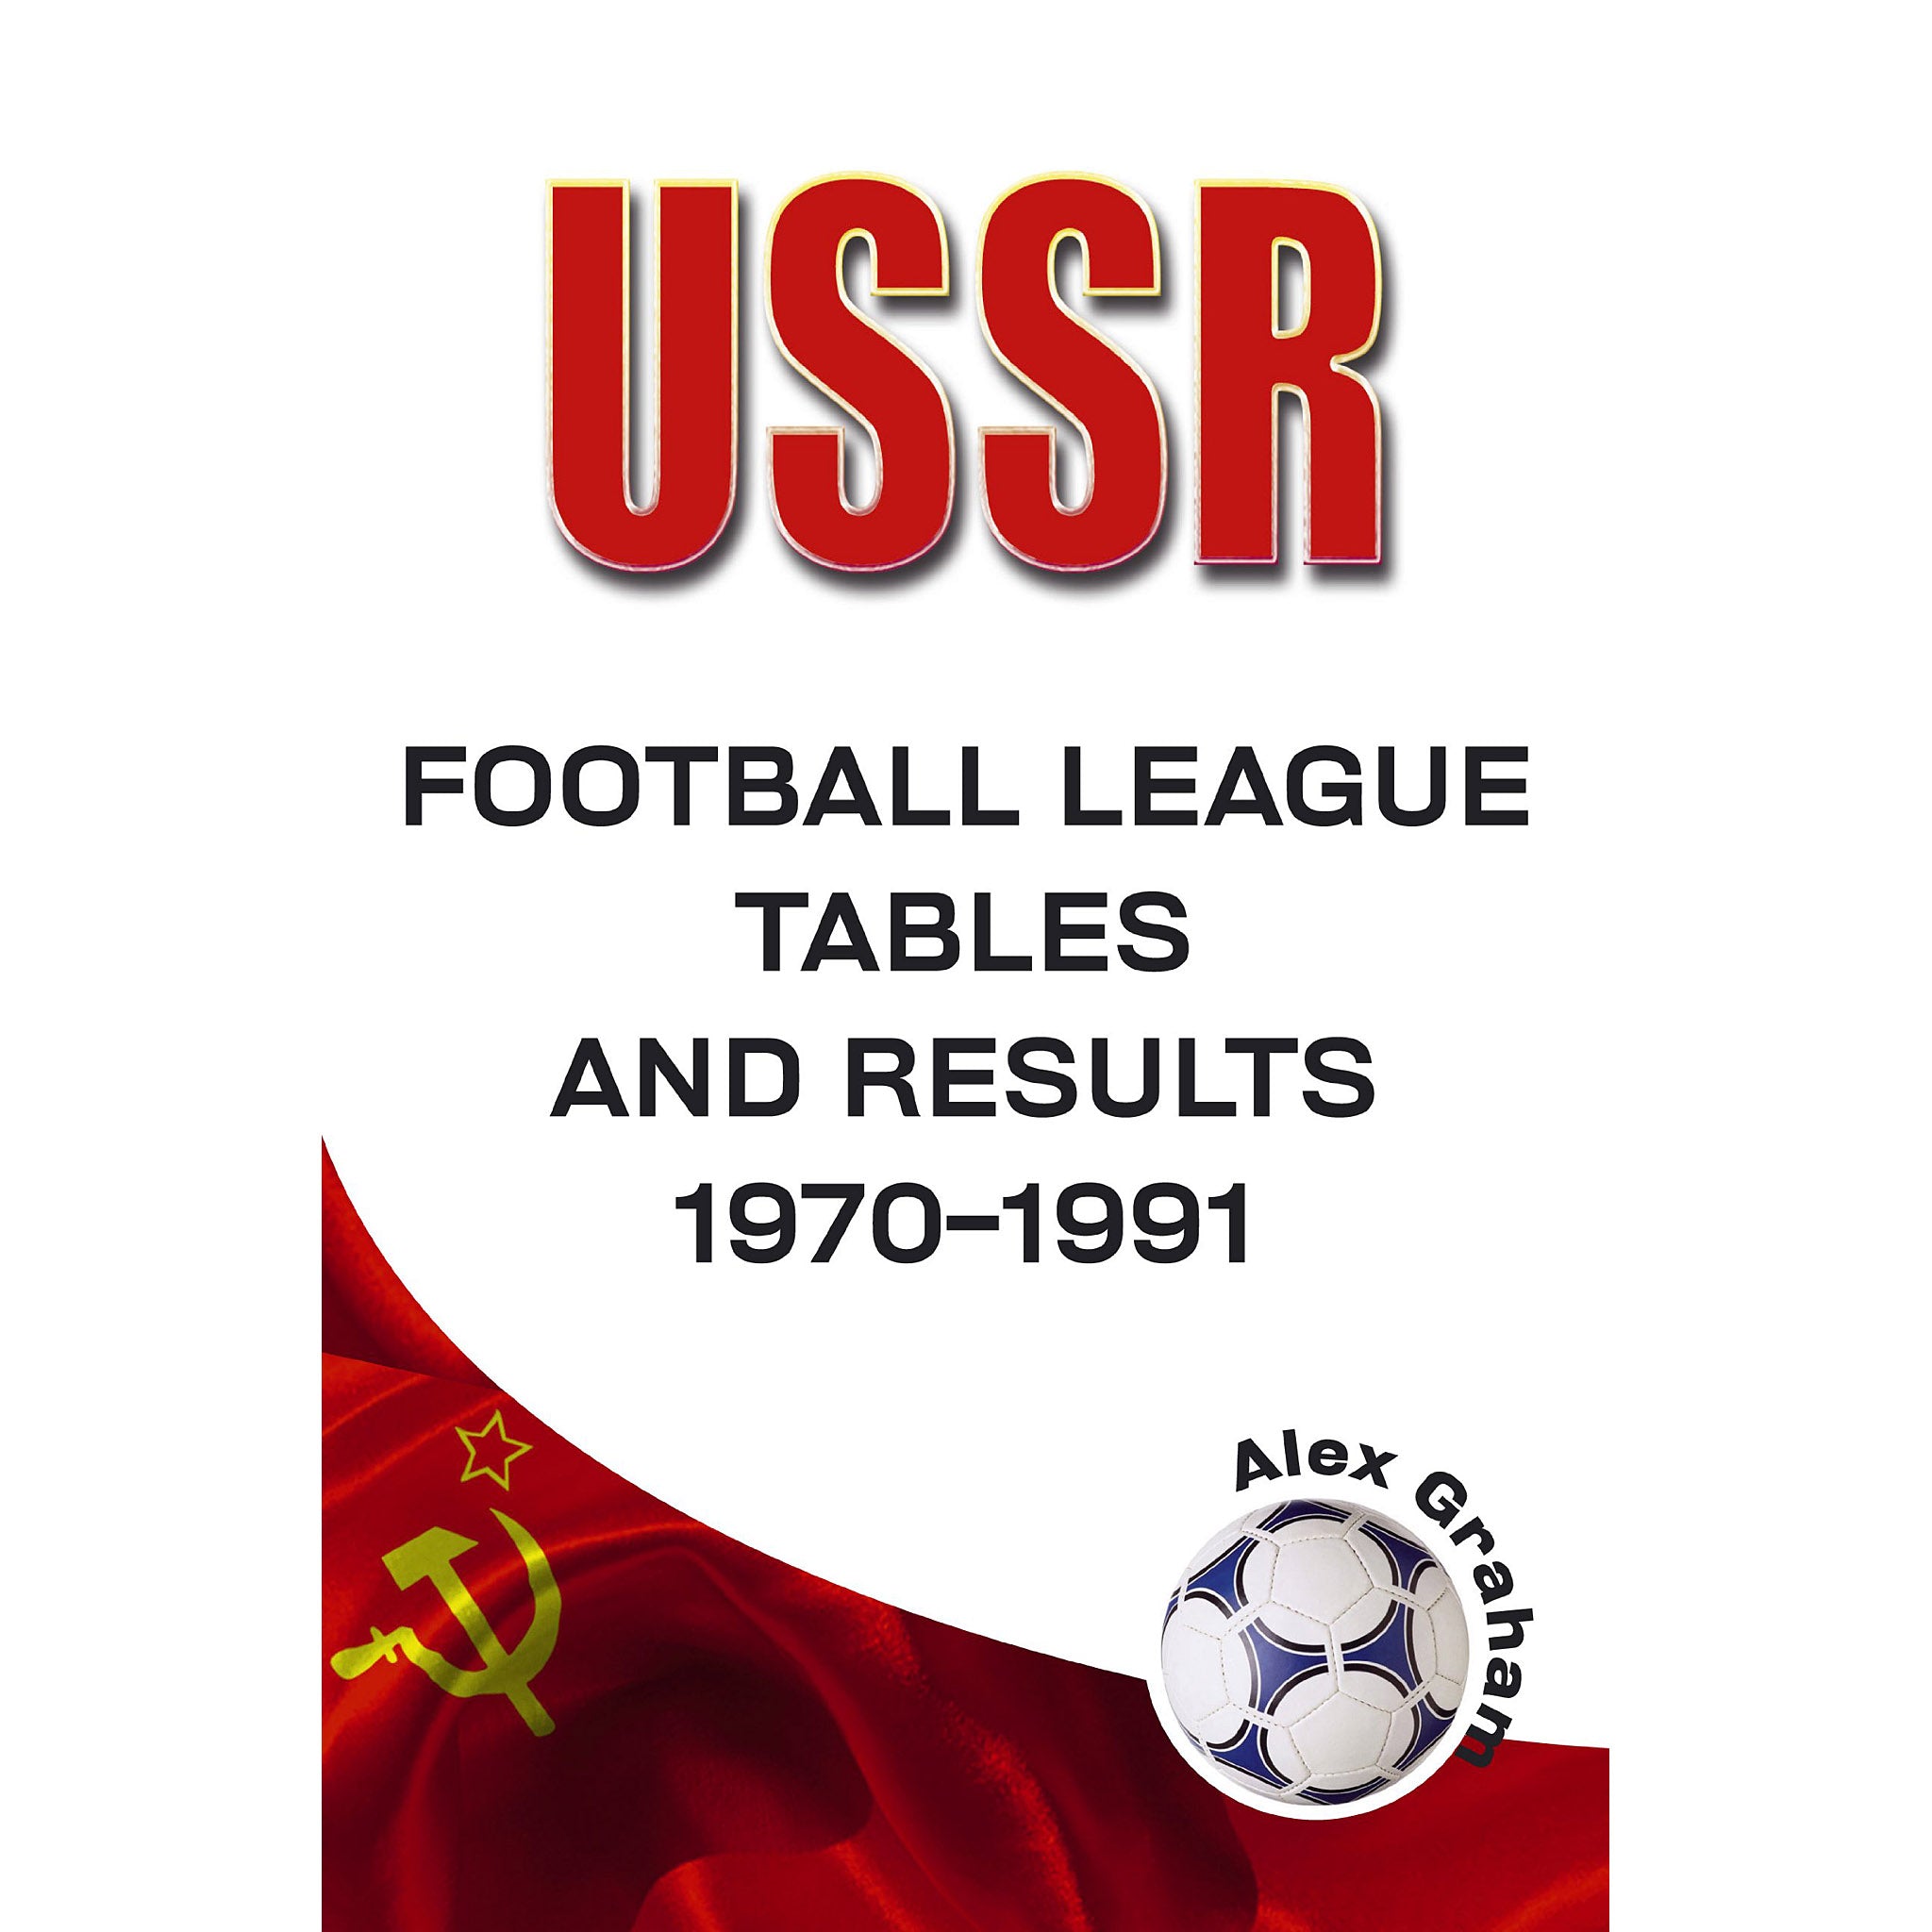 USSR – Football League Tables and Results 1970-1991